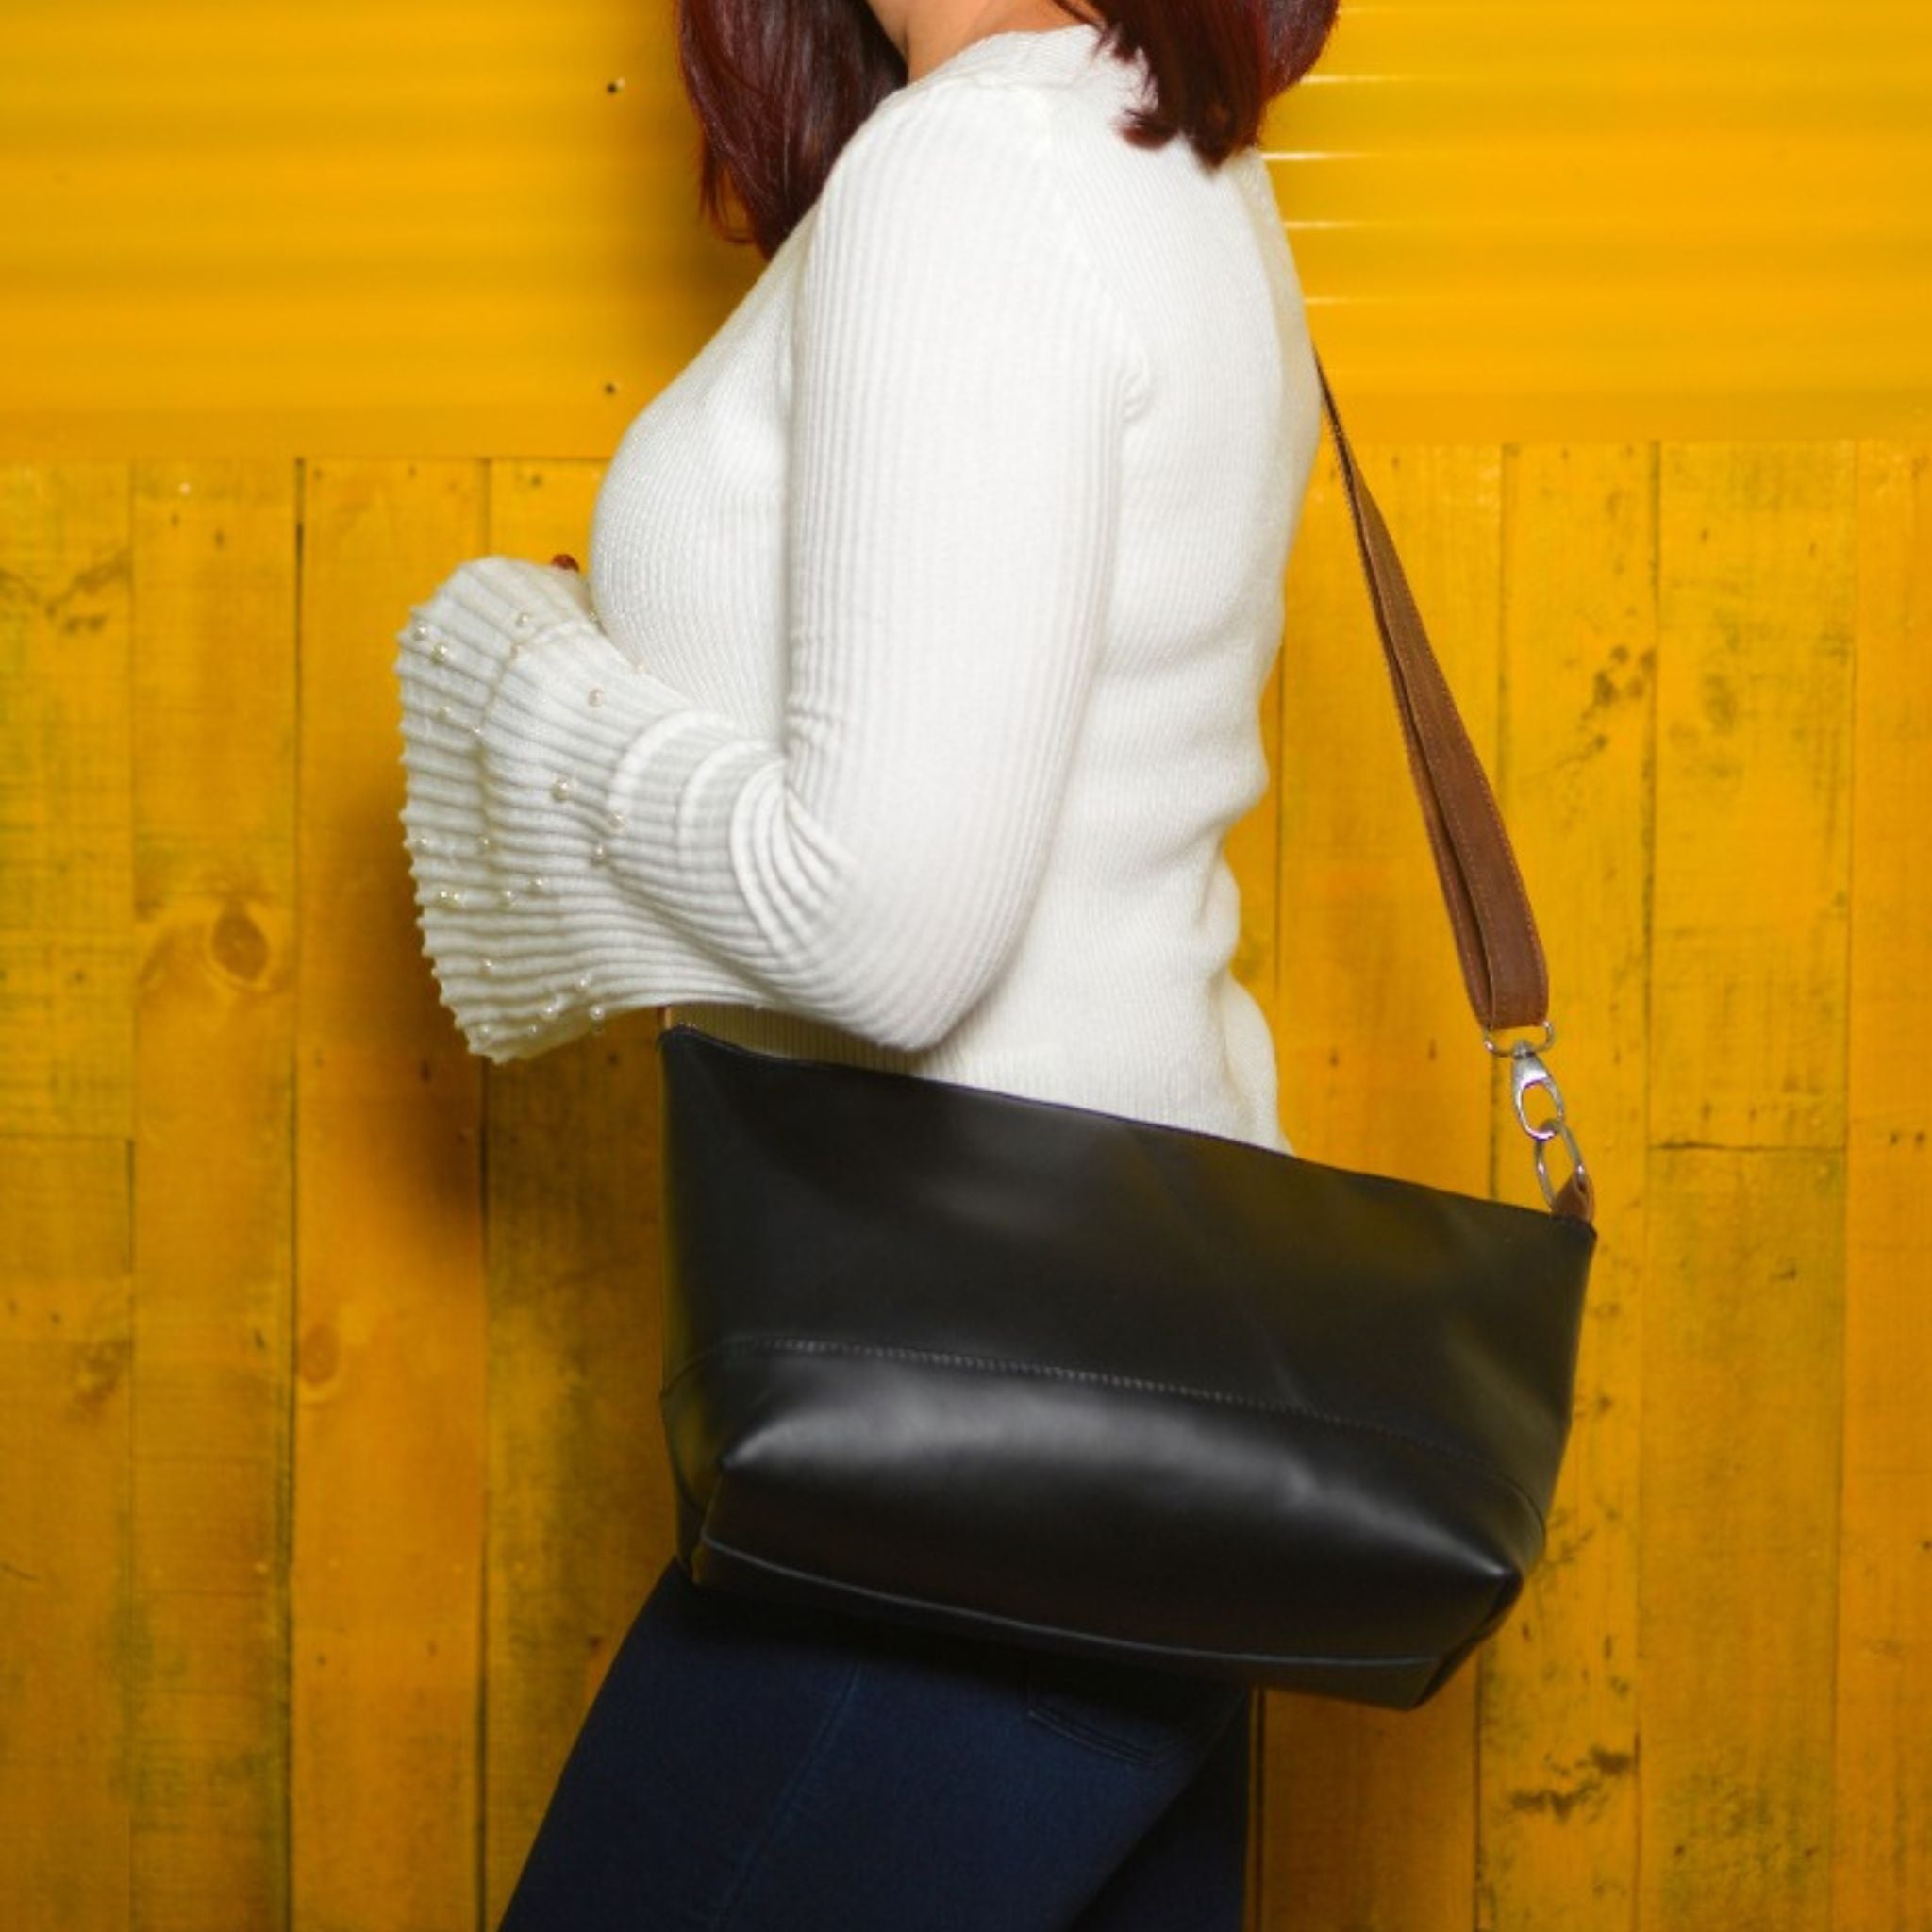 The Maddison Leather tote bag